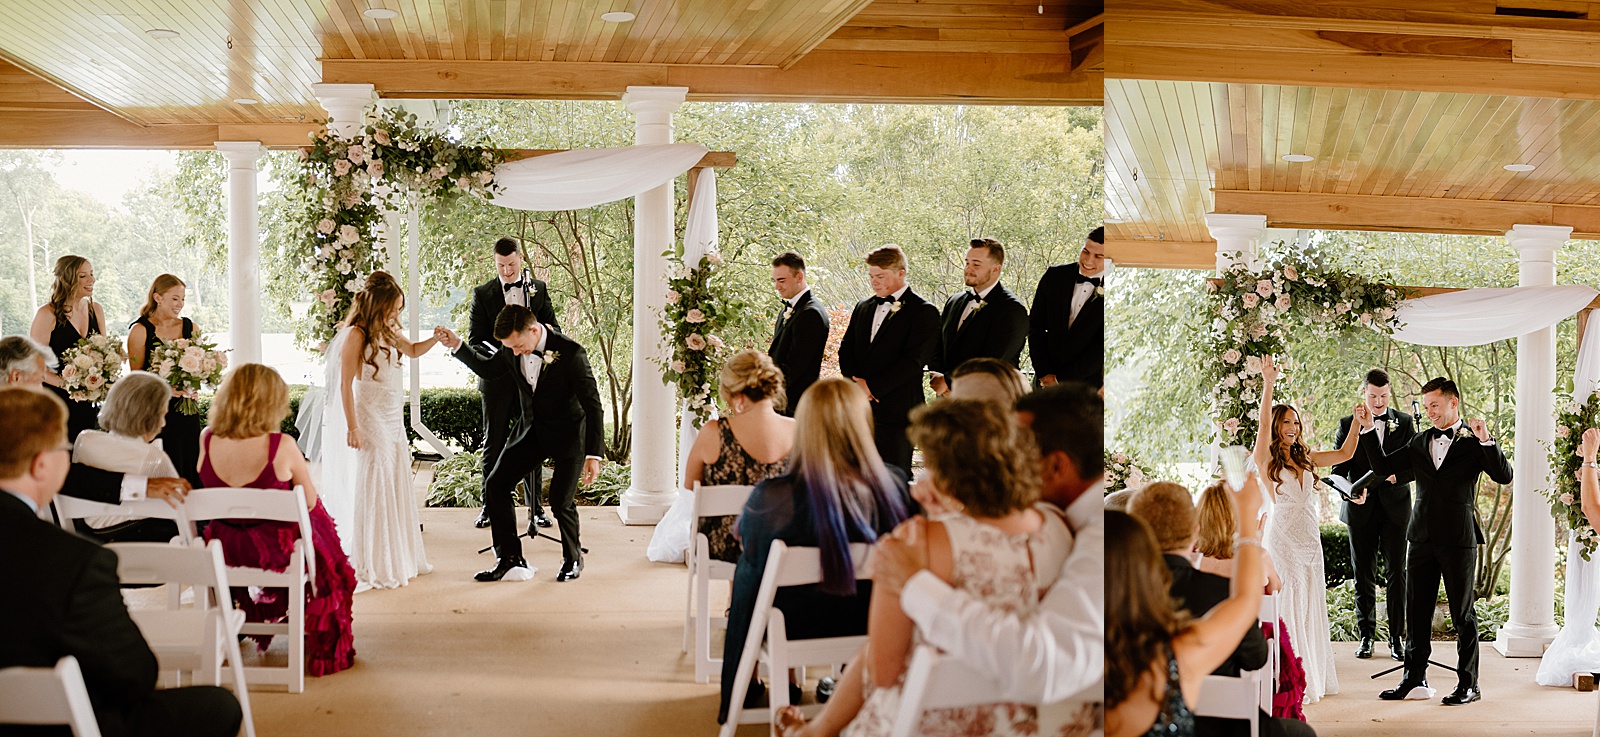 Groom smashing a glass during their Jewish wedding ceremony in Fort Wayne. 